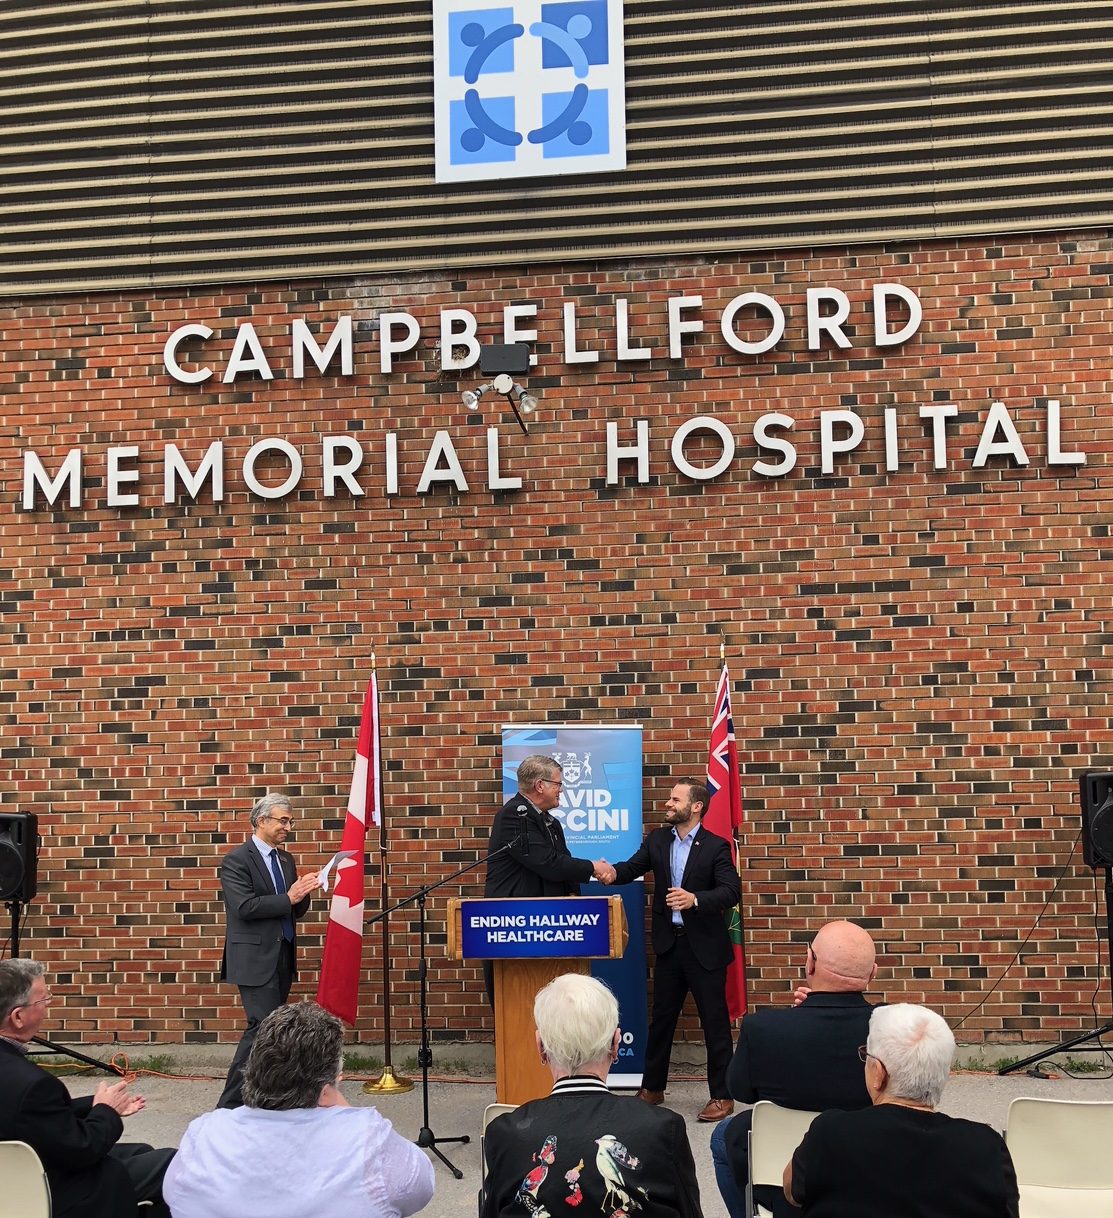 Northumberland-Peterborough South MPP David Piccini, right, announces $5 million in funding for Campbellford Memorial Hospital on Wednesday.